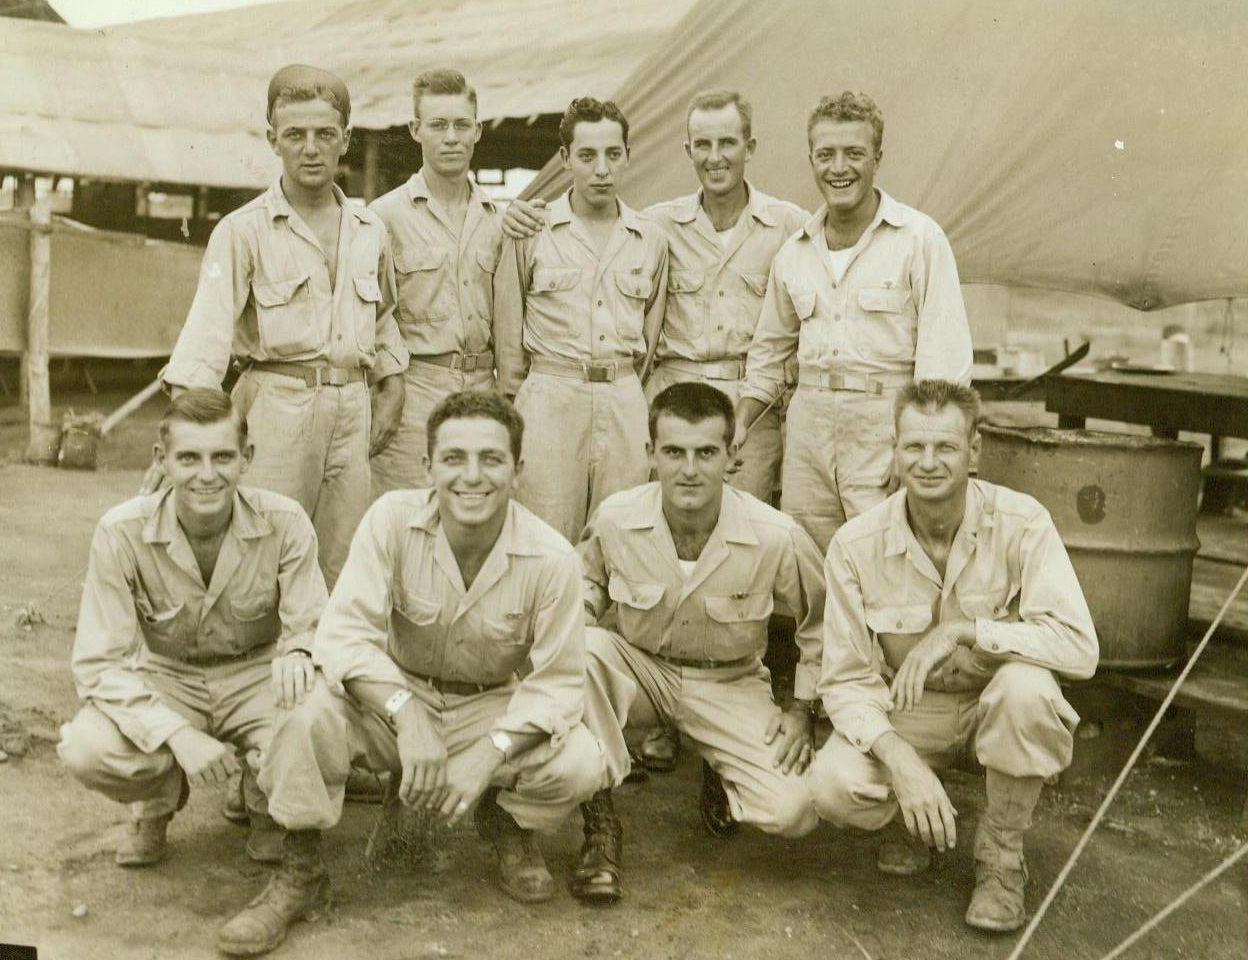 Paratroop Cooks And Waiters, 10/18/1944. South Pacific – Nine Yank paratroopers, who serve as cooks and waiters for an airborne unit, pose for their photo outside the mess tent. Left to right: (Front Row) Pfc. John Gurriell, Paterson, N.J.; Pfc. Joe Baldino, Philadelphia, Pa.; Pvt. Billy J. Rudolph, Paducah, Ky.; Pvt. Harold Richardson, Oakland Calif.; (Back Row) Pvt. Emil Decola, Philadelphia Pa.; Pvt. Weldon Cooper, Roscoe Texas; Pvy. Ernest Apodach, Phoenix, Ariz; Pfc. Maurice Dalton, Pawtucket, R.I.; and Pfc. Michael Simolo, Brooklyn, N.Y.  10/18/44 Credit Line –Wp—(ACME);